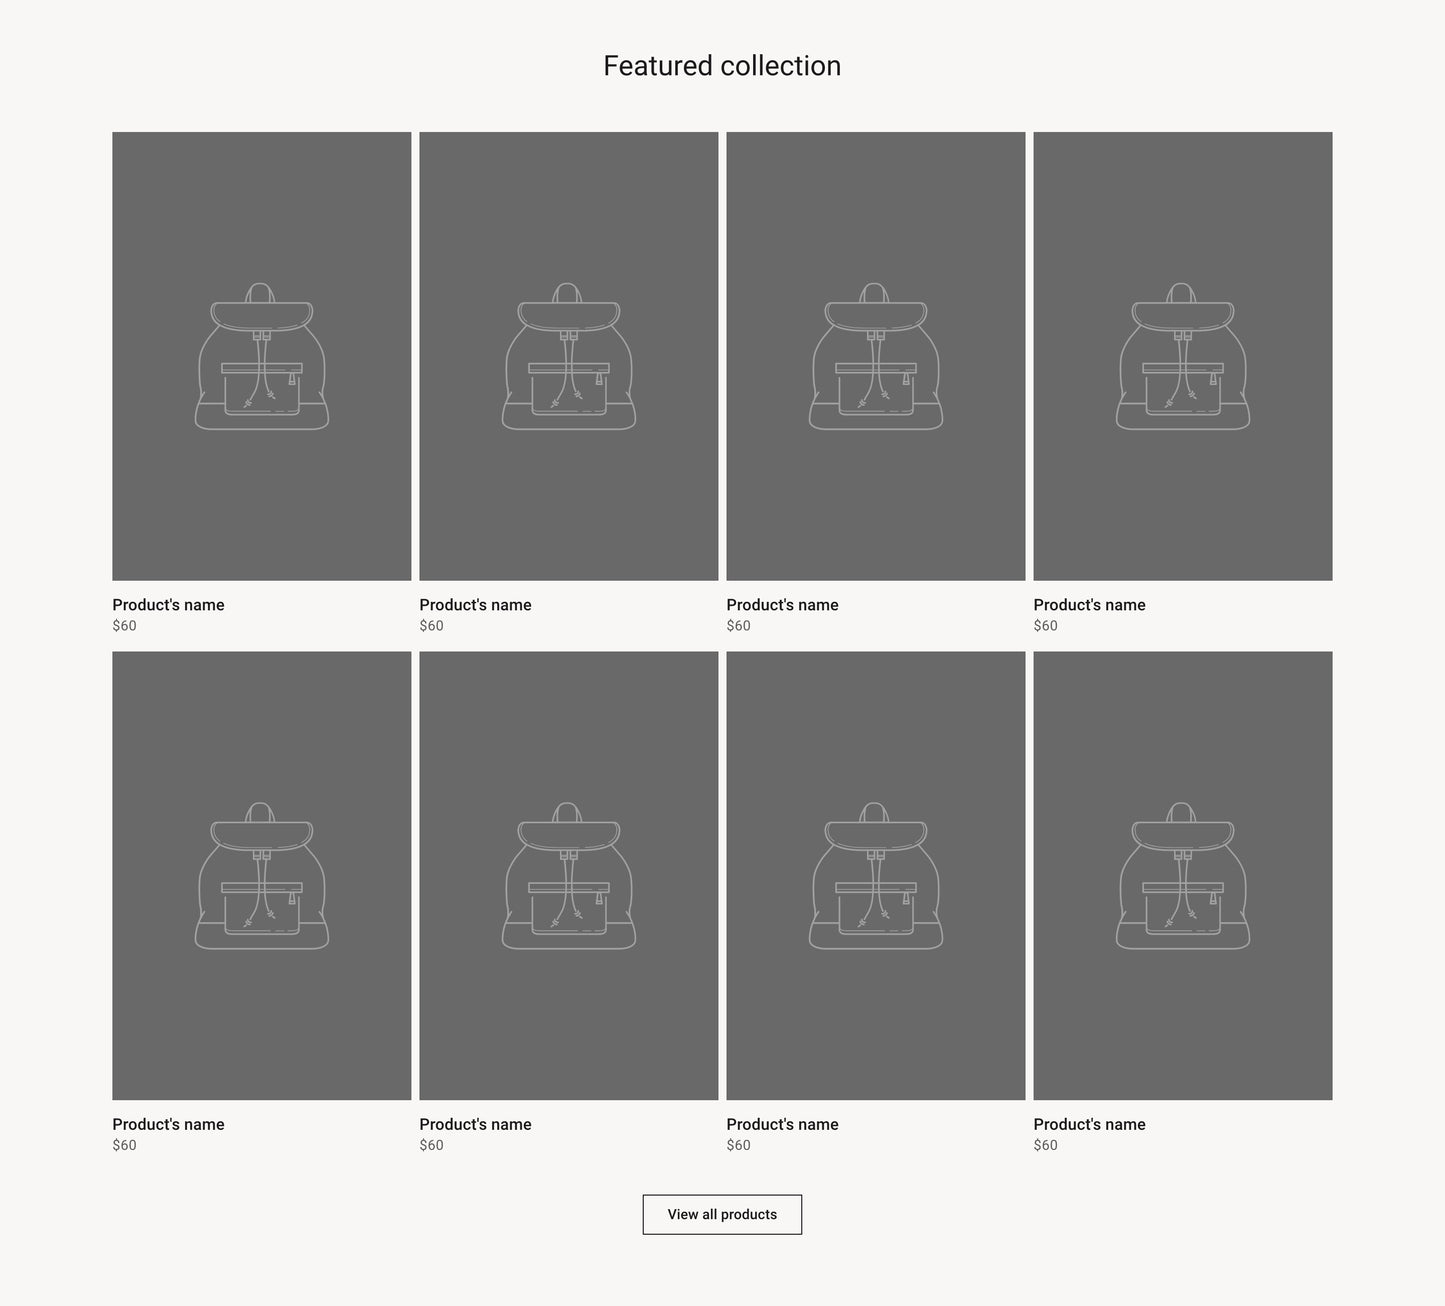 Chord Section - Featured collection